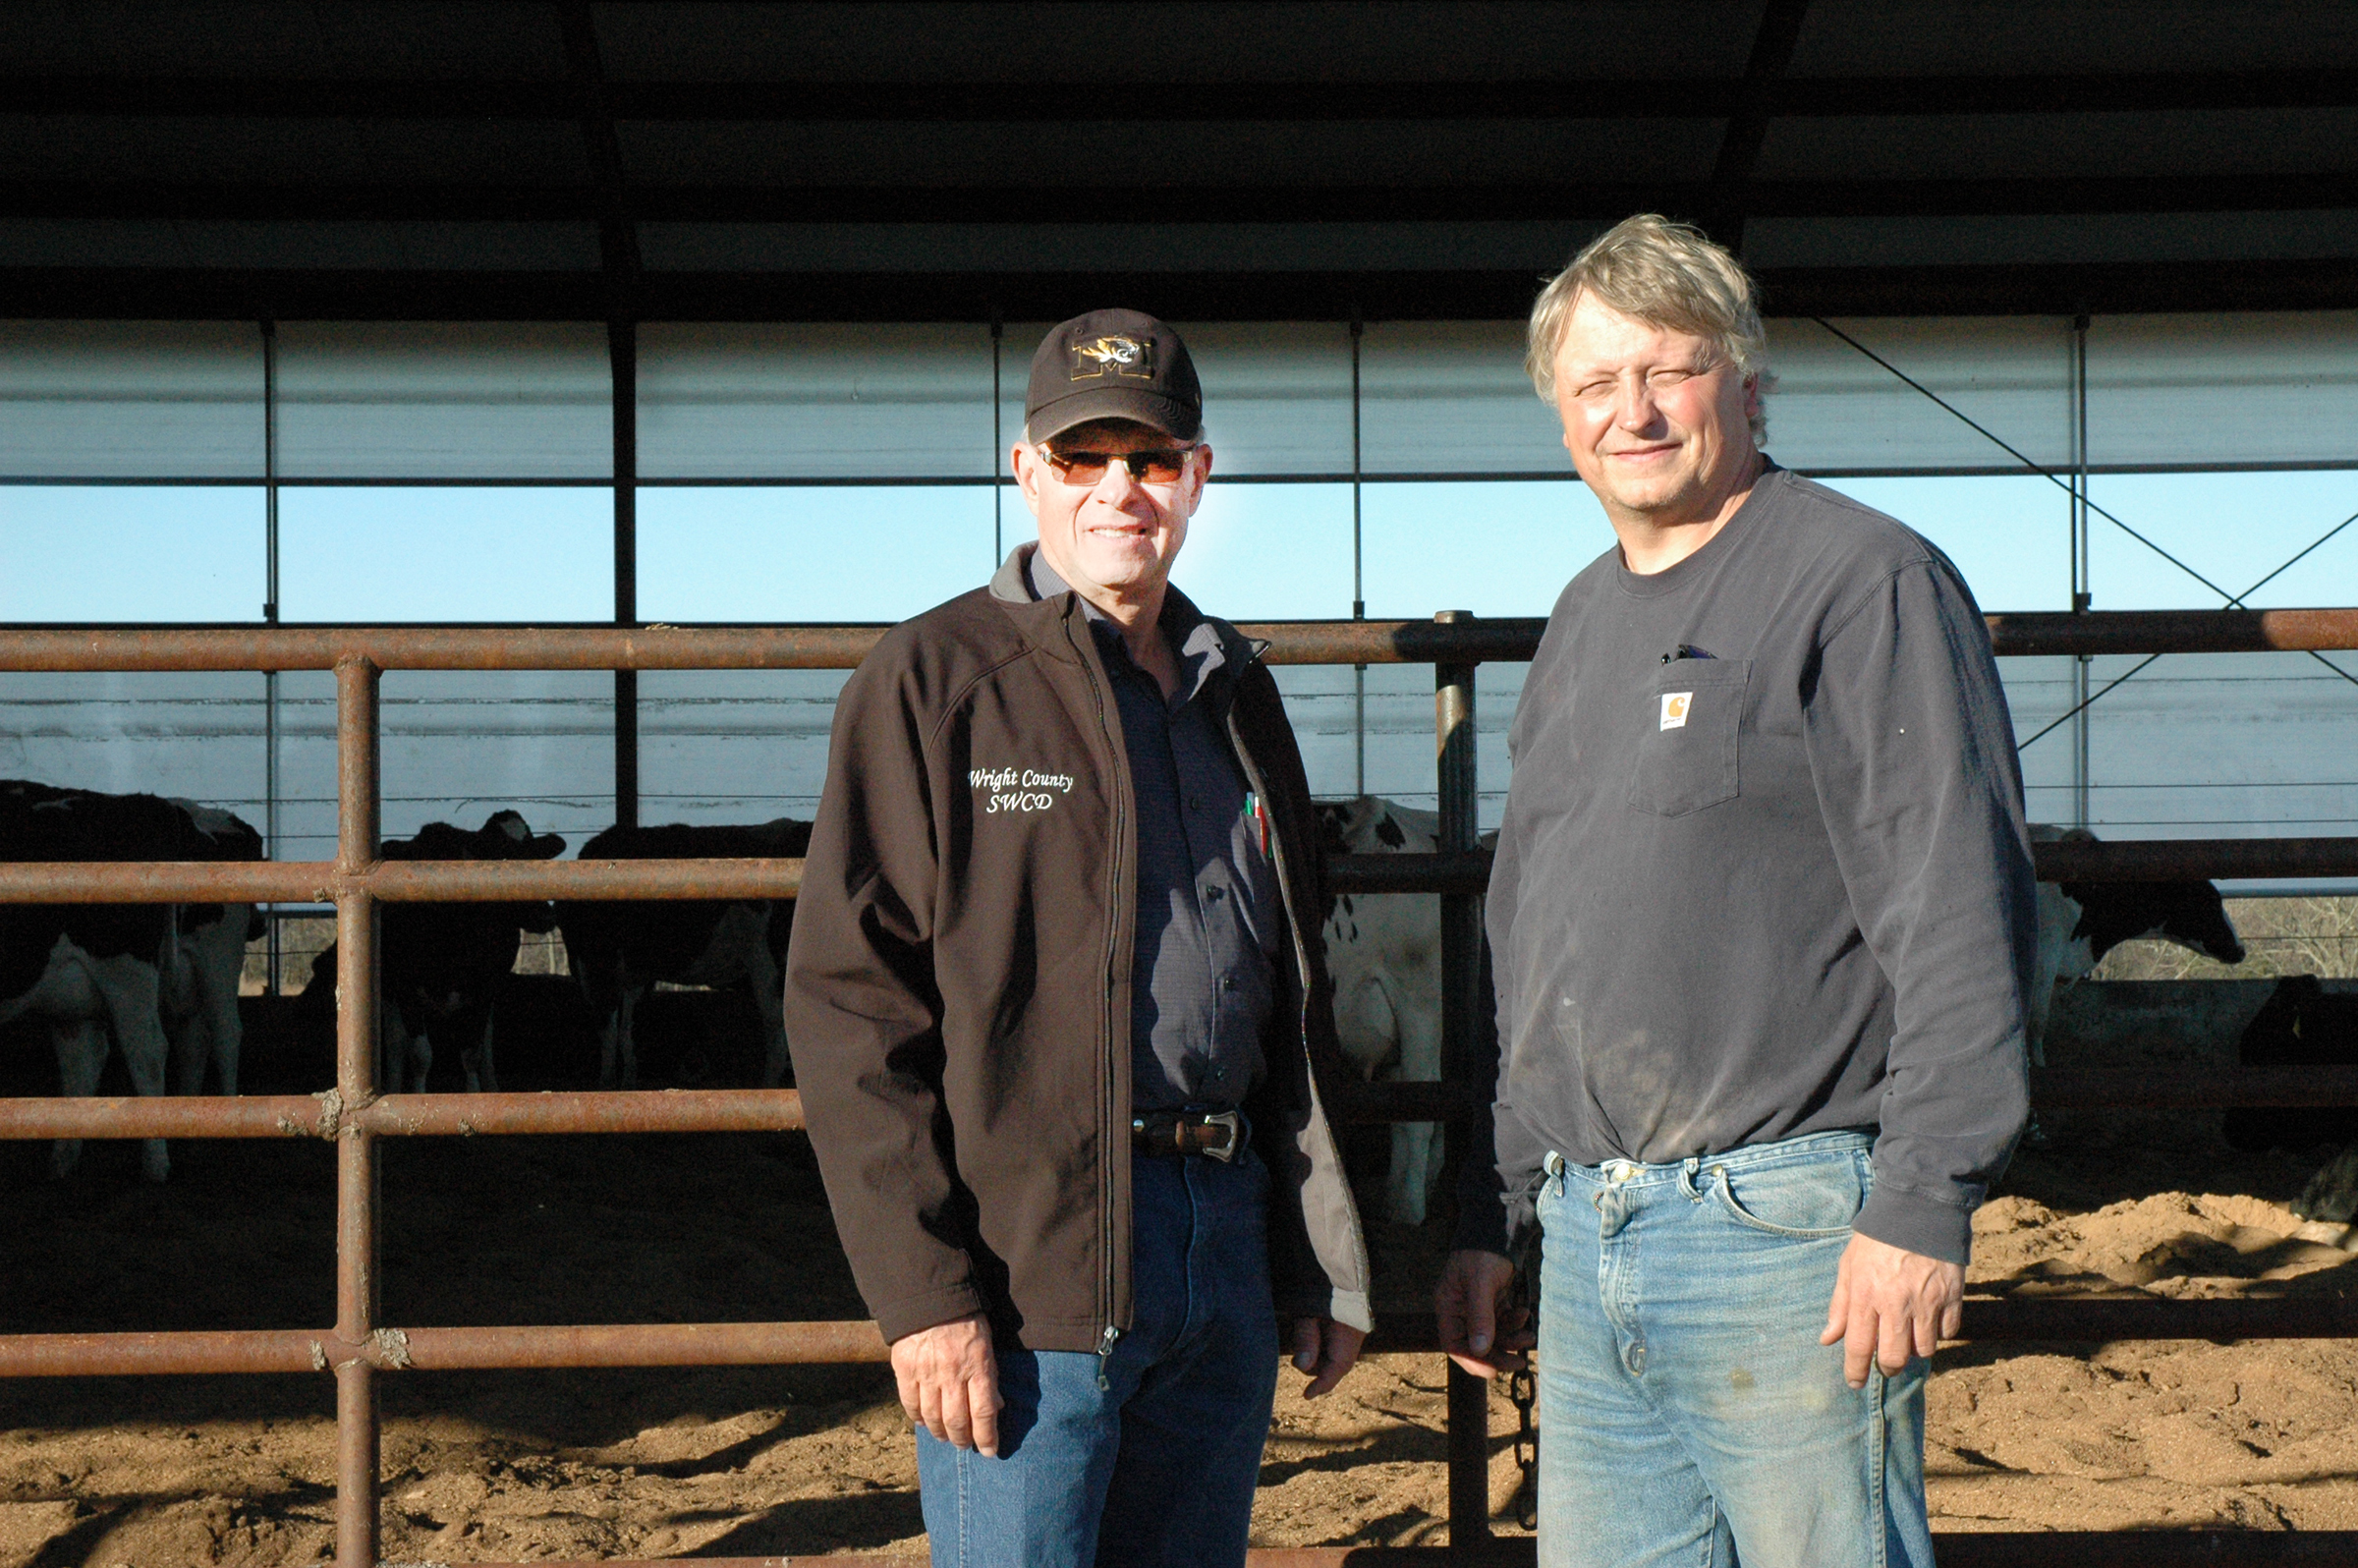 University of Missouri Extension specialist Ted Probert, left, says compost-bedded pack barns provide many benefits for dairy cows. Dwight Fry, right, says one of the benefits has been reduced somatic cell counts, an indicator of higher milk quality.